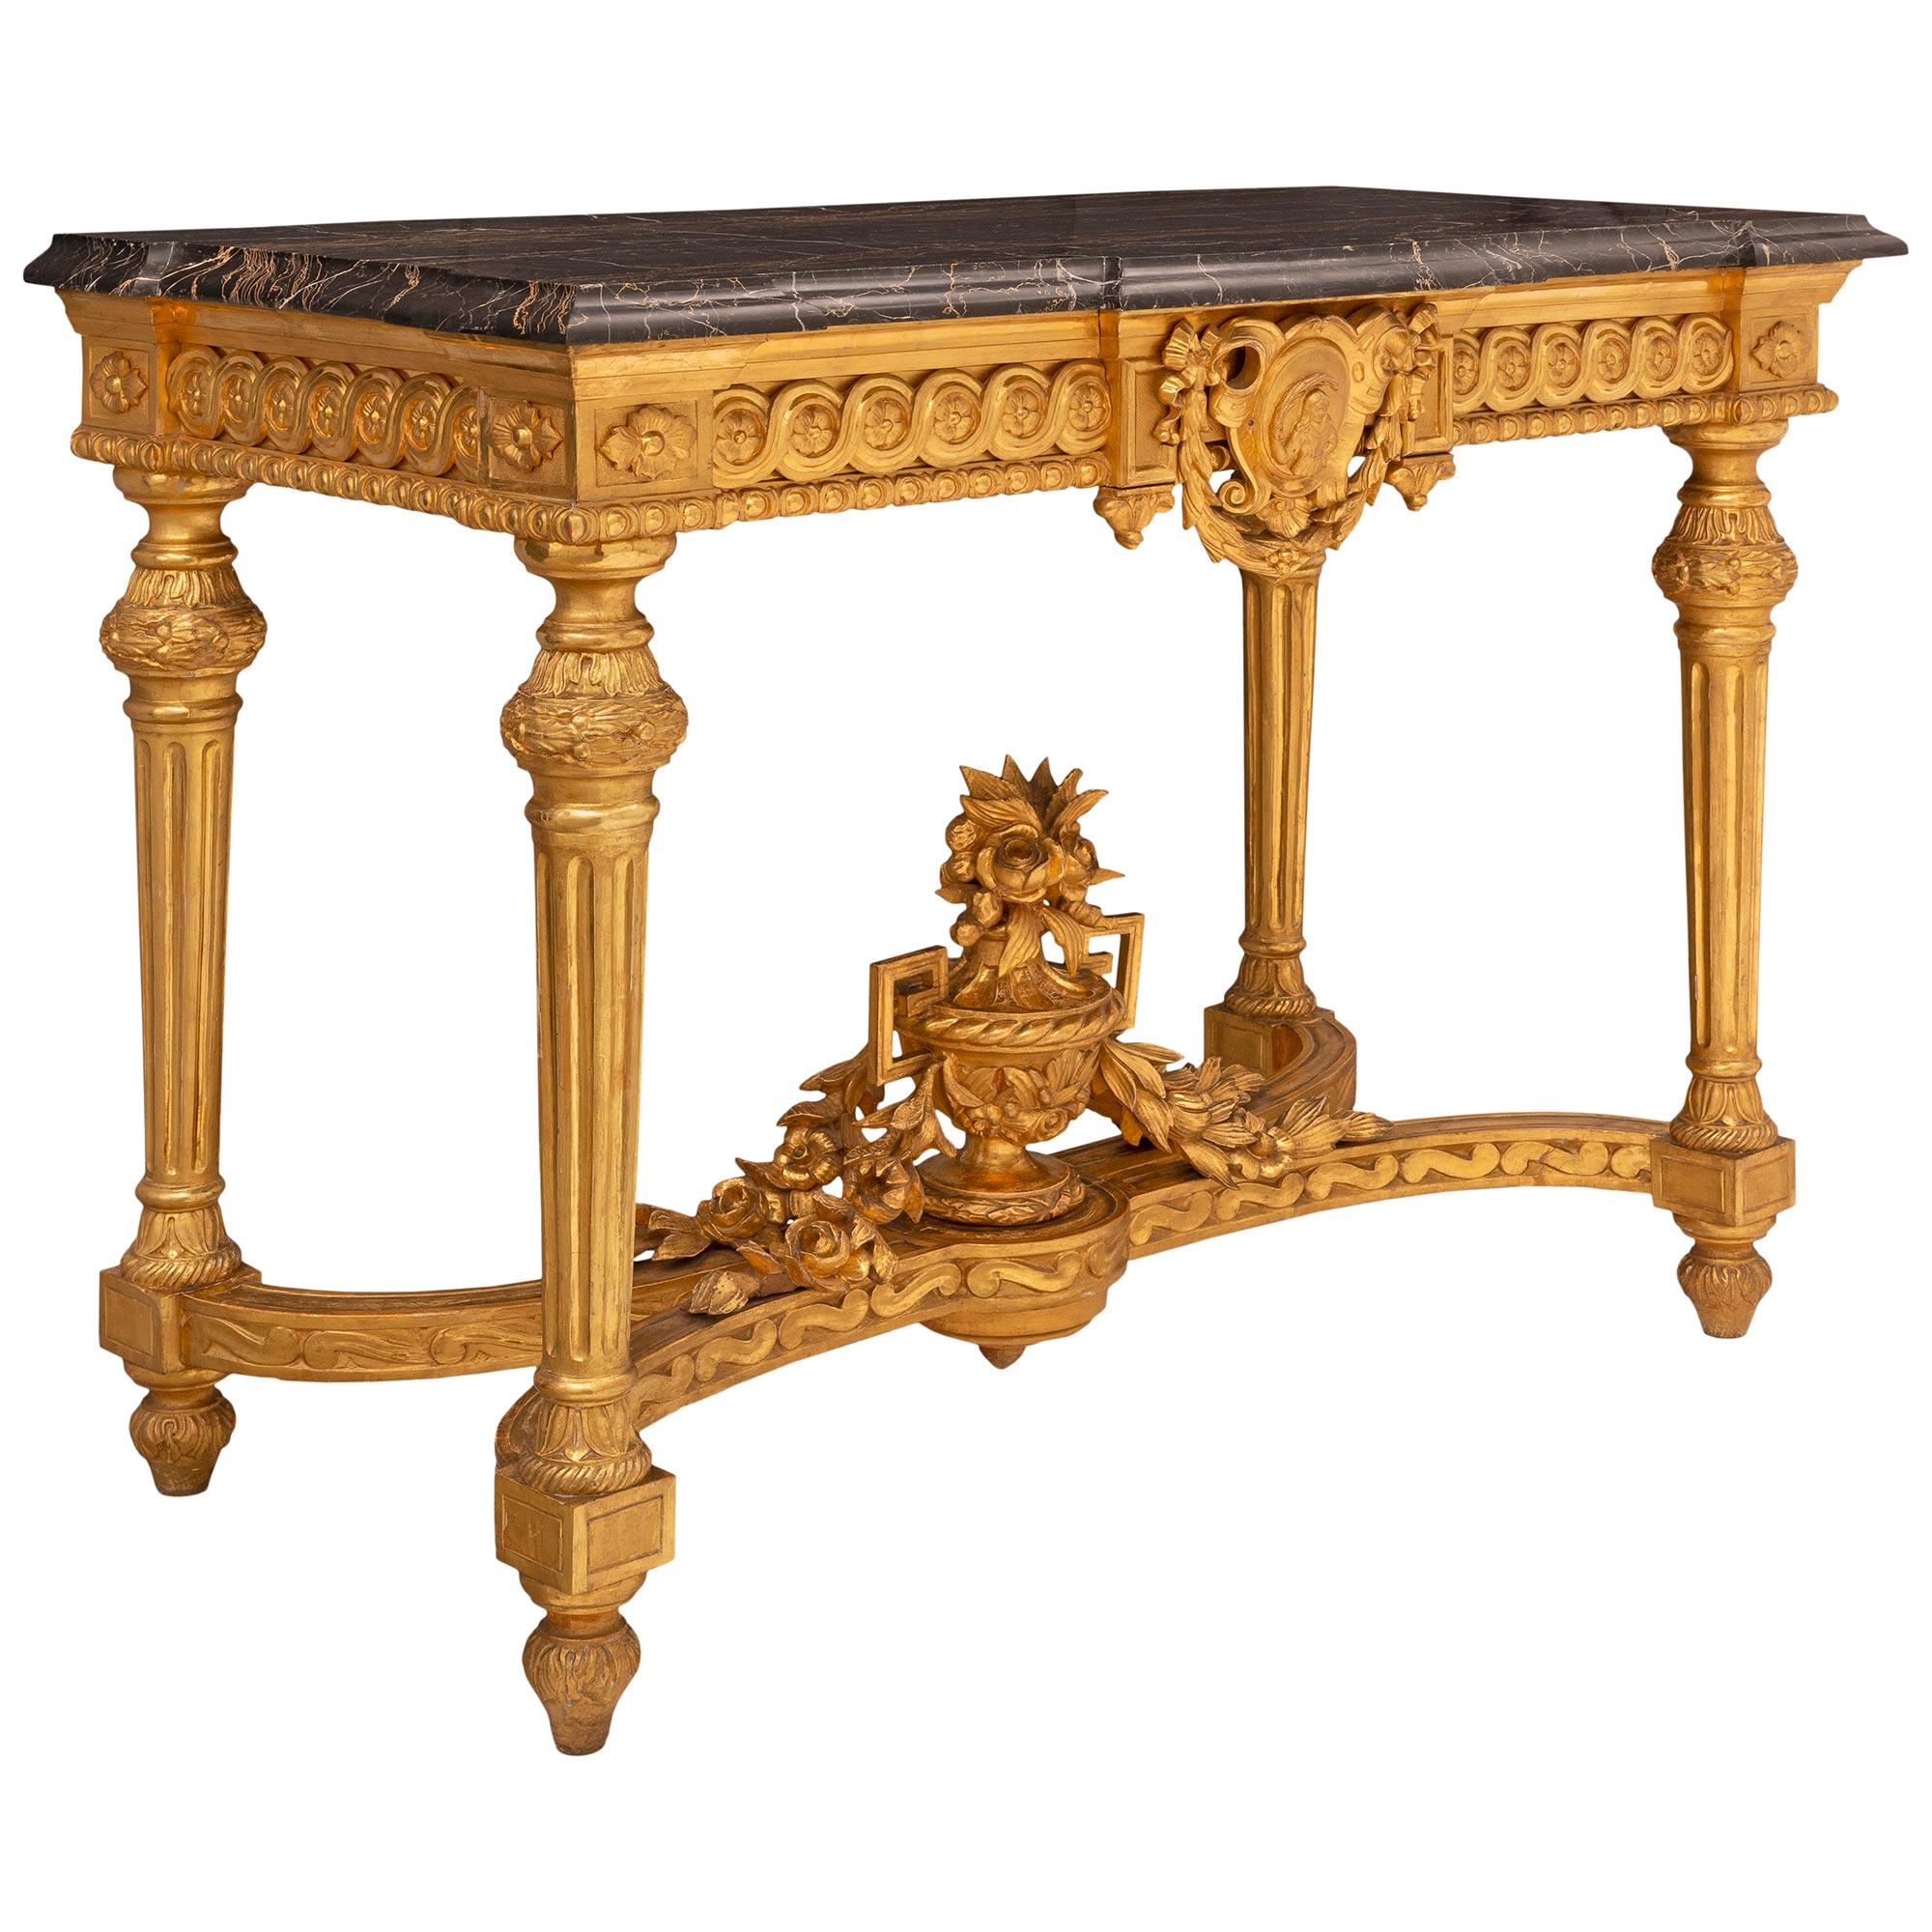 Pair of Italian Mid-19th Century Louis XVI Style Giltwood Freestanding Consoles In Good Condition For Sale In West Palm Beach, FL